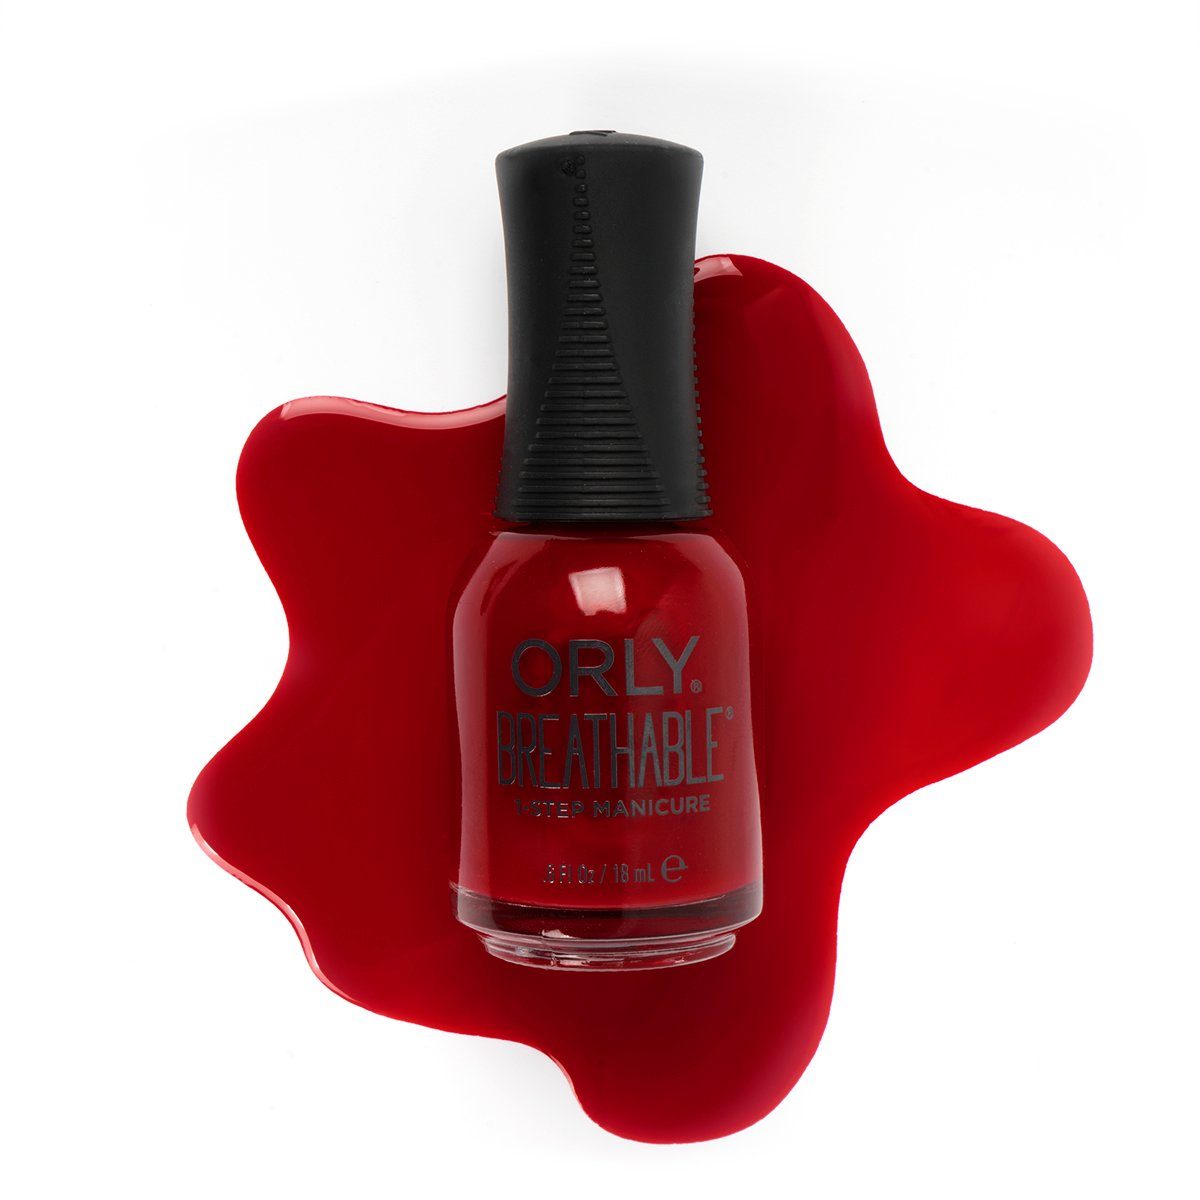 ORLY Nagellack ORLY In One Breathable Vermillion